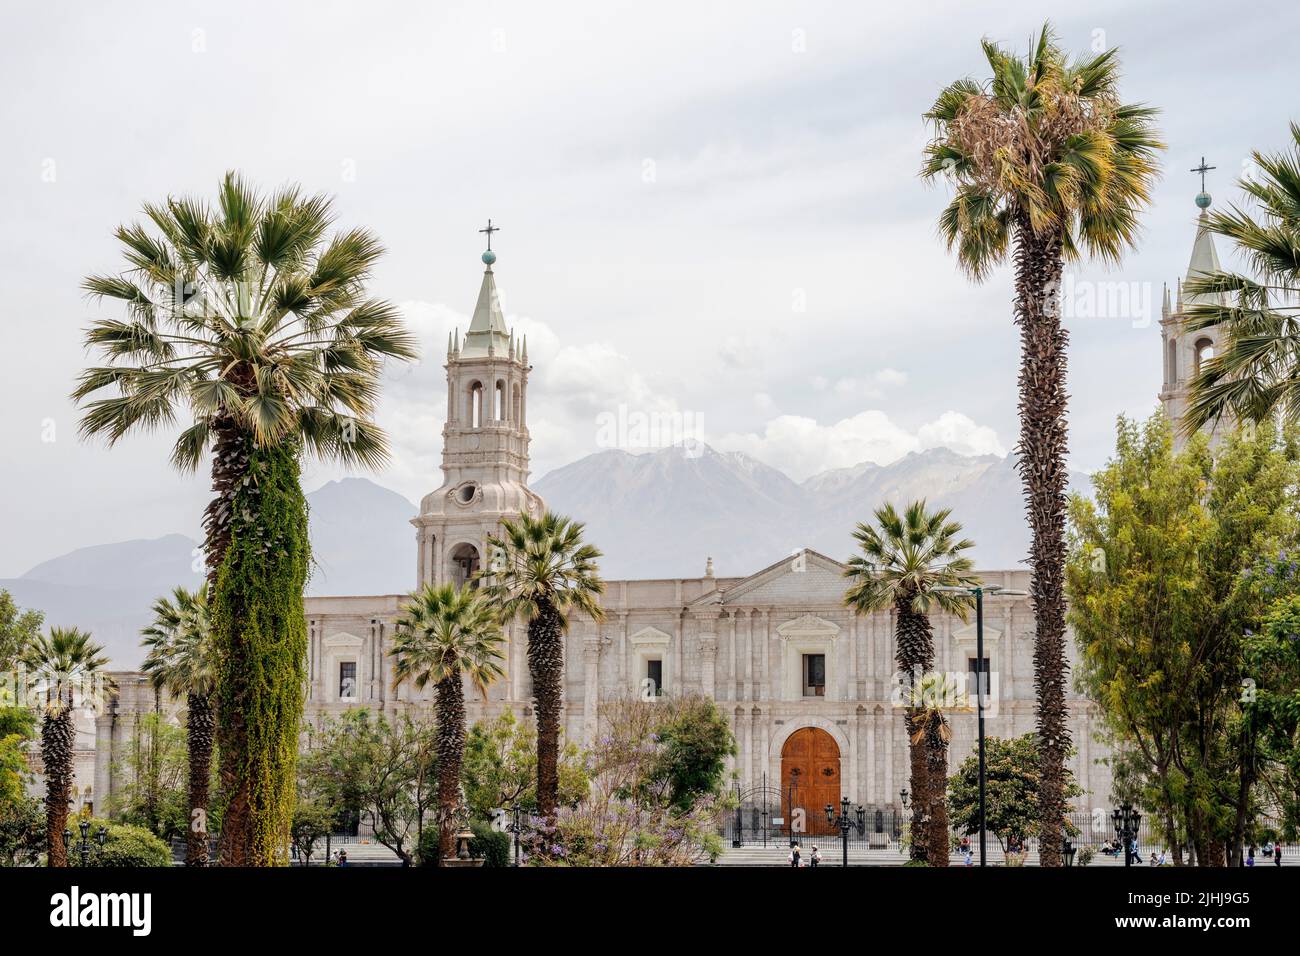 palm trees and white stone church at famous Plaza de Armas in Arequipa city, Peru Stock Photo